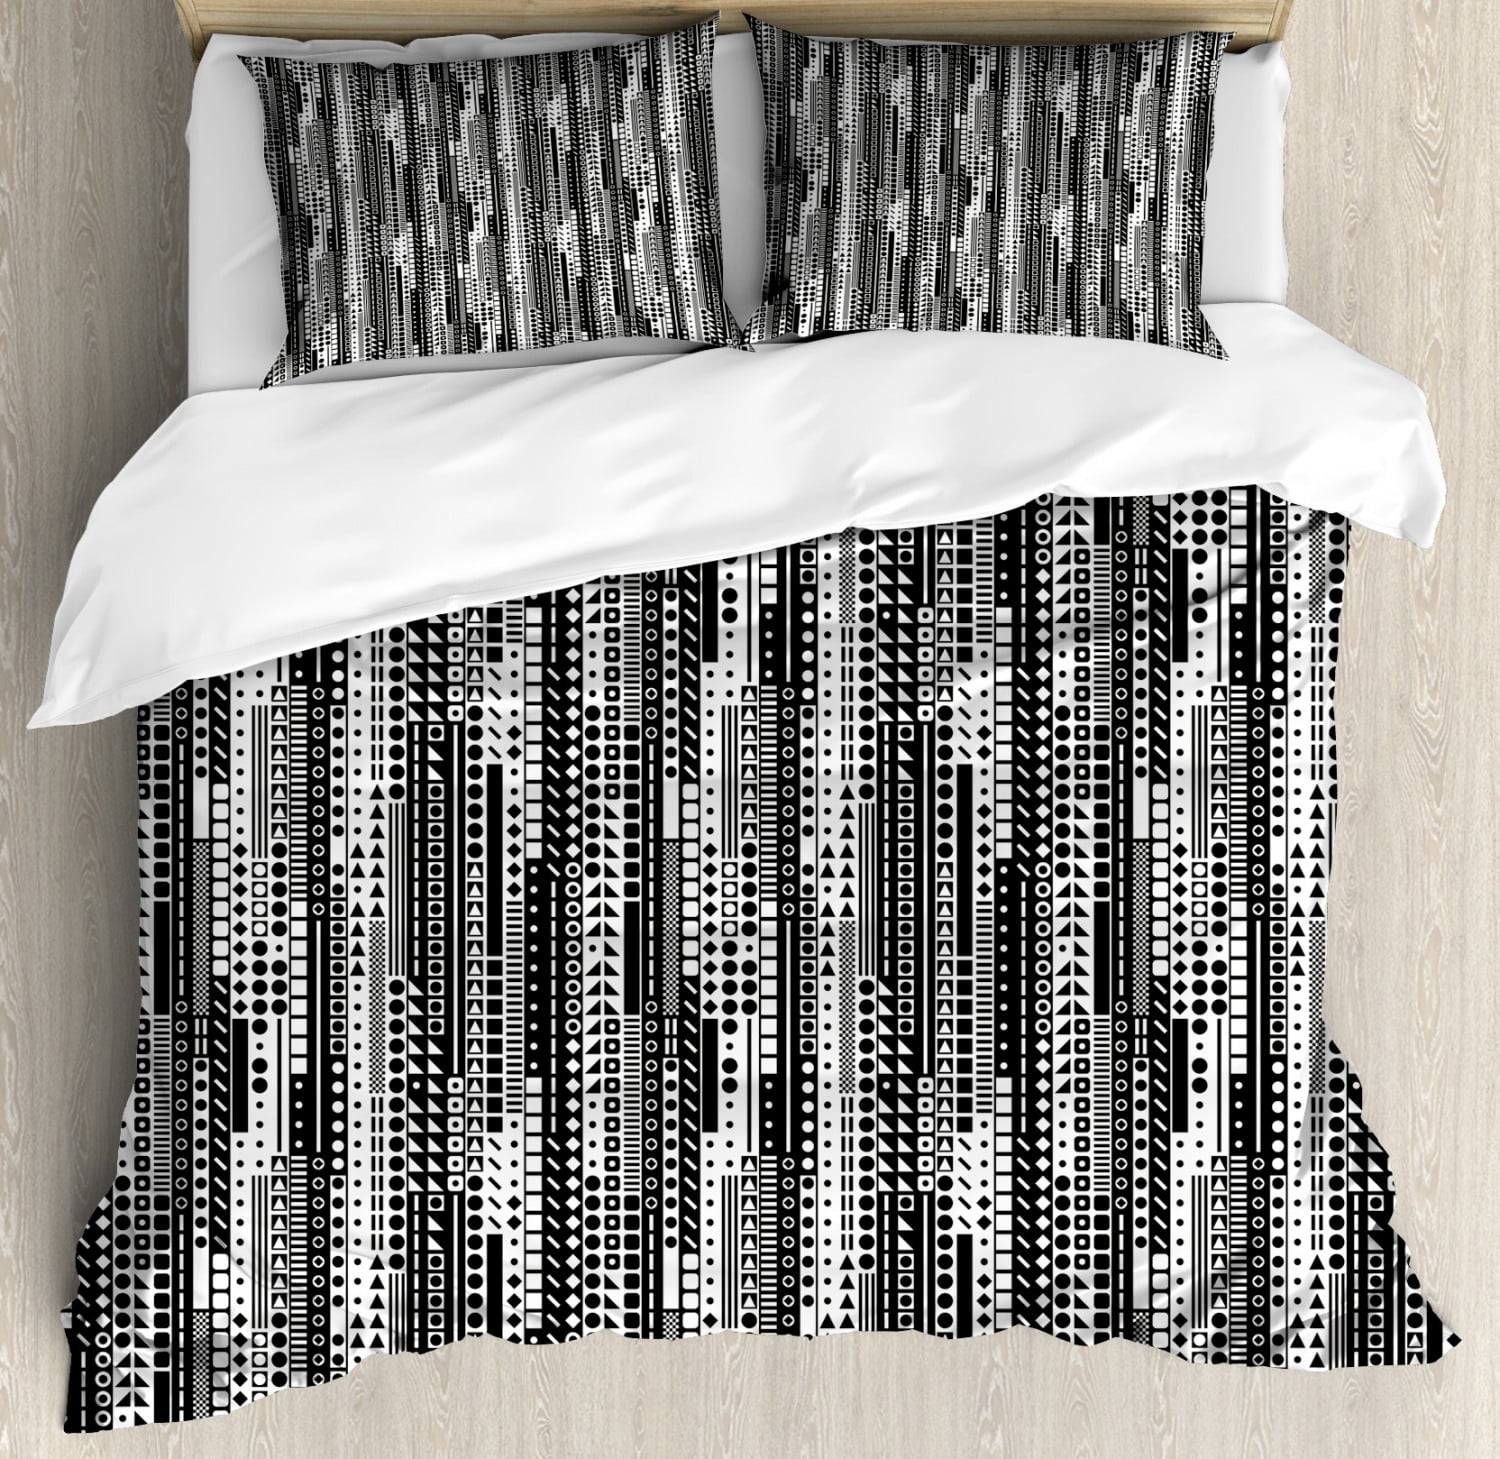 Triangles Shapes Black And White Cotton Sateen Pillow Sham Bedding by Spoonflower Geometric Pillow Sham Tritri Black by elvelyckan